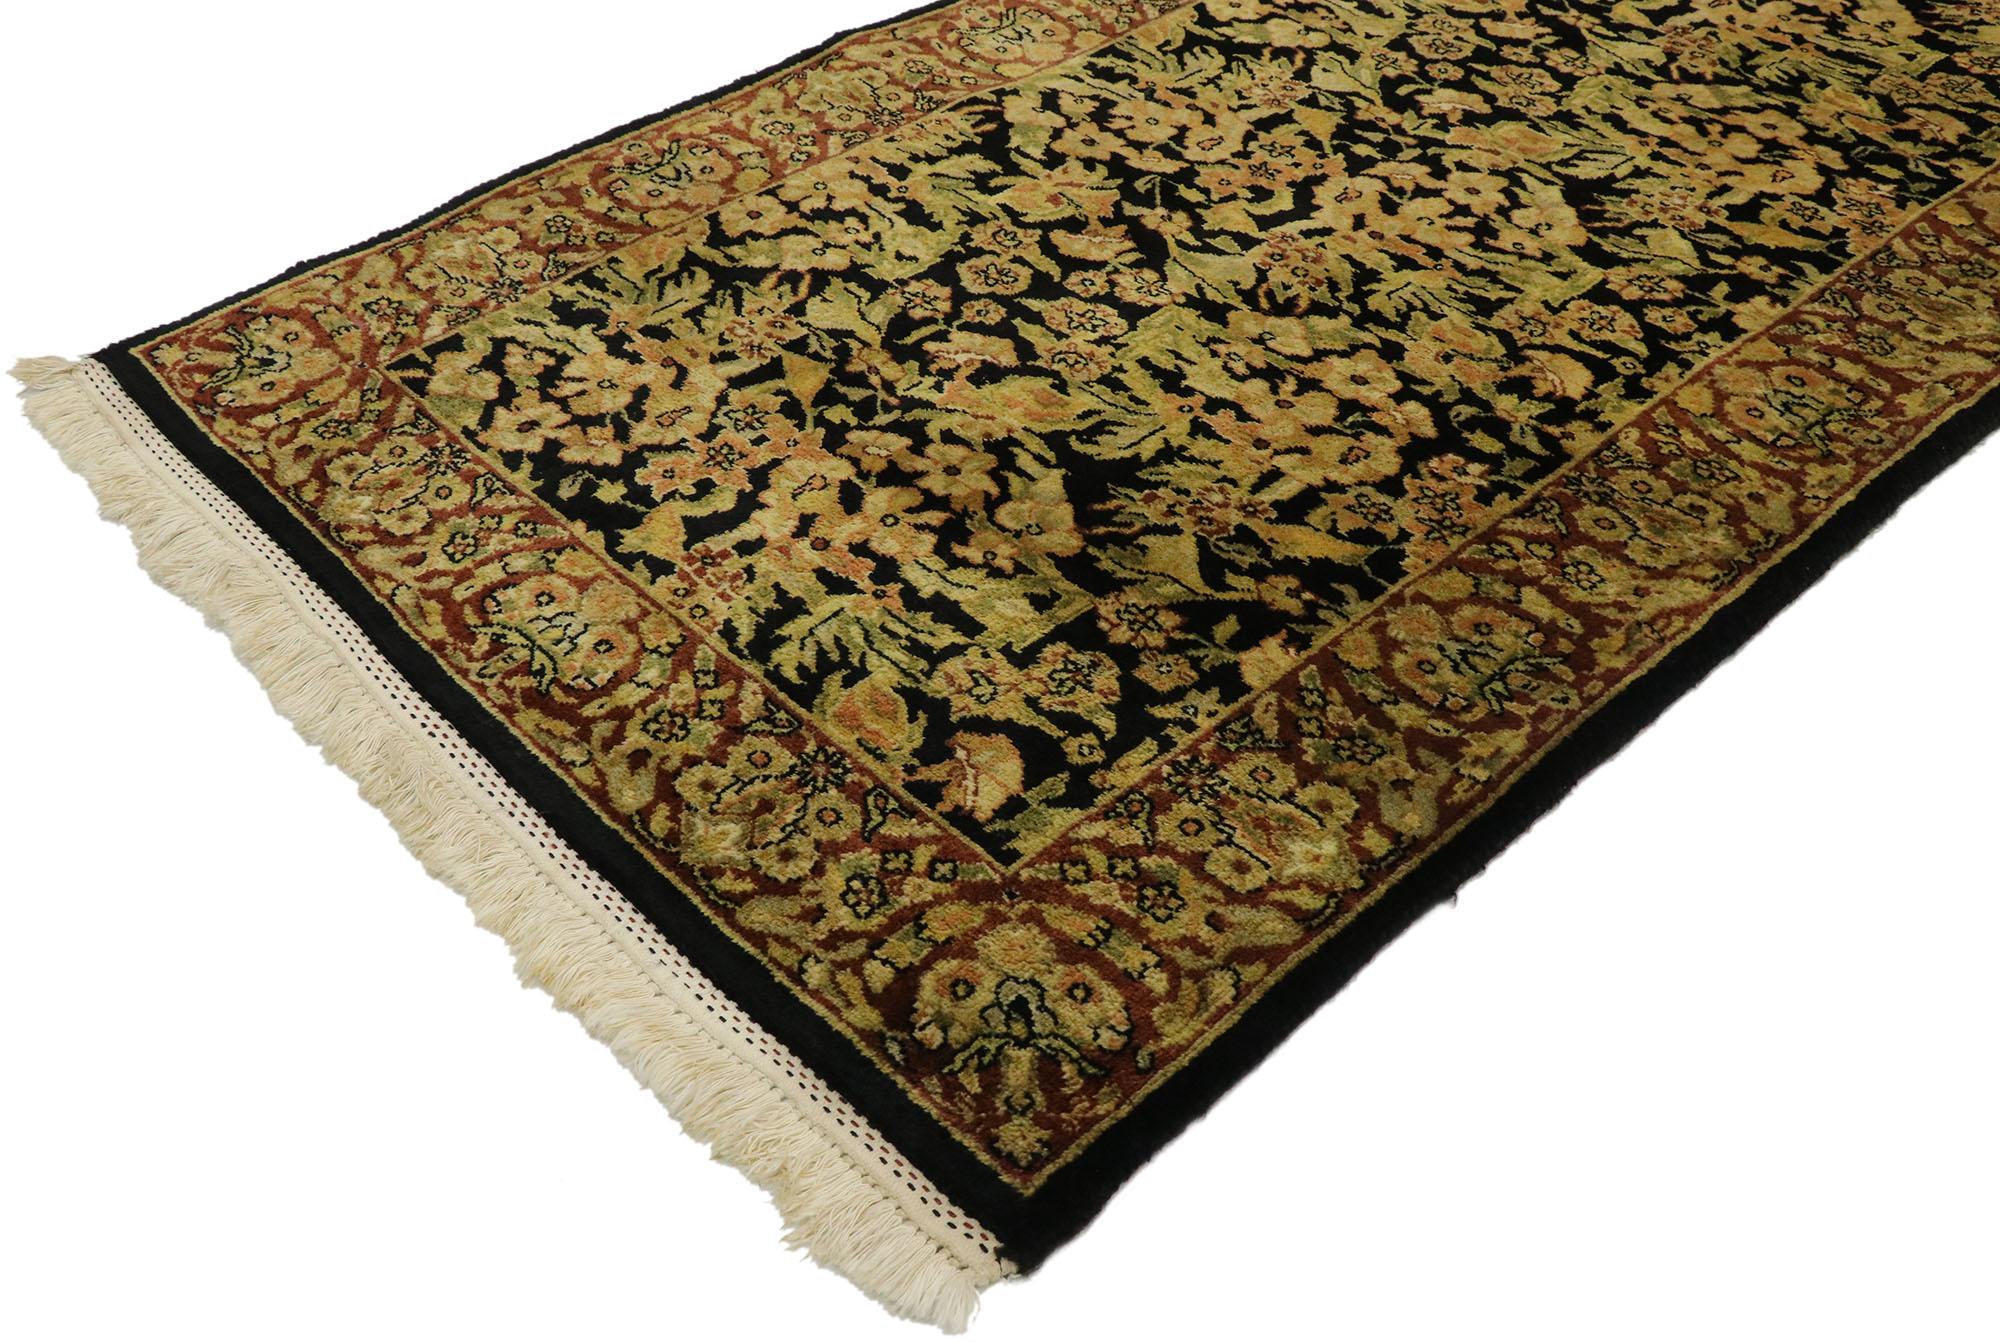 77529, vintage Indian runner with Old World Traditional style. The architectural elements of naturalistic forms combined with a traditional style, this hand knotted wool vintage Indian rug is poised to impress. The abrashed field is covered in an